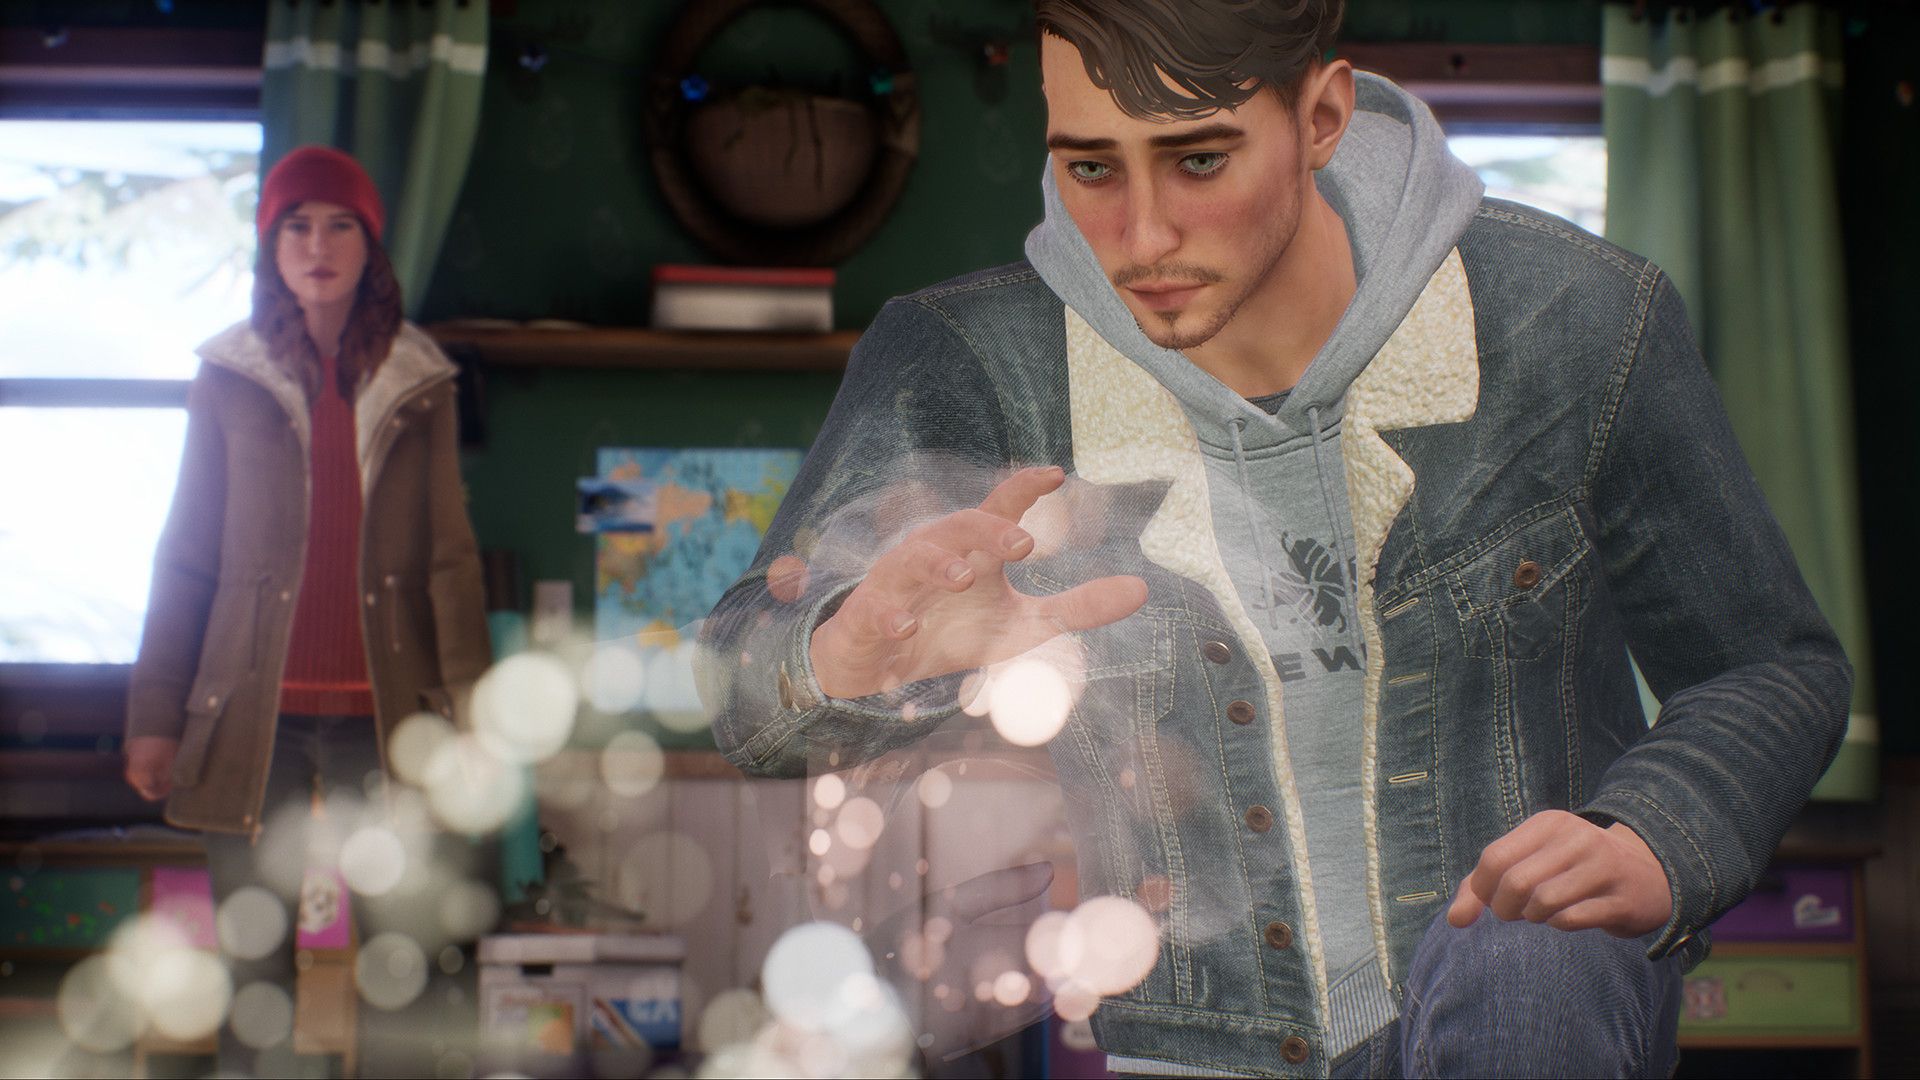 download tell me why dontnod for free